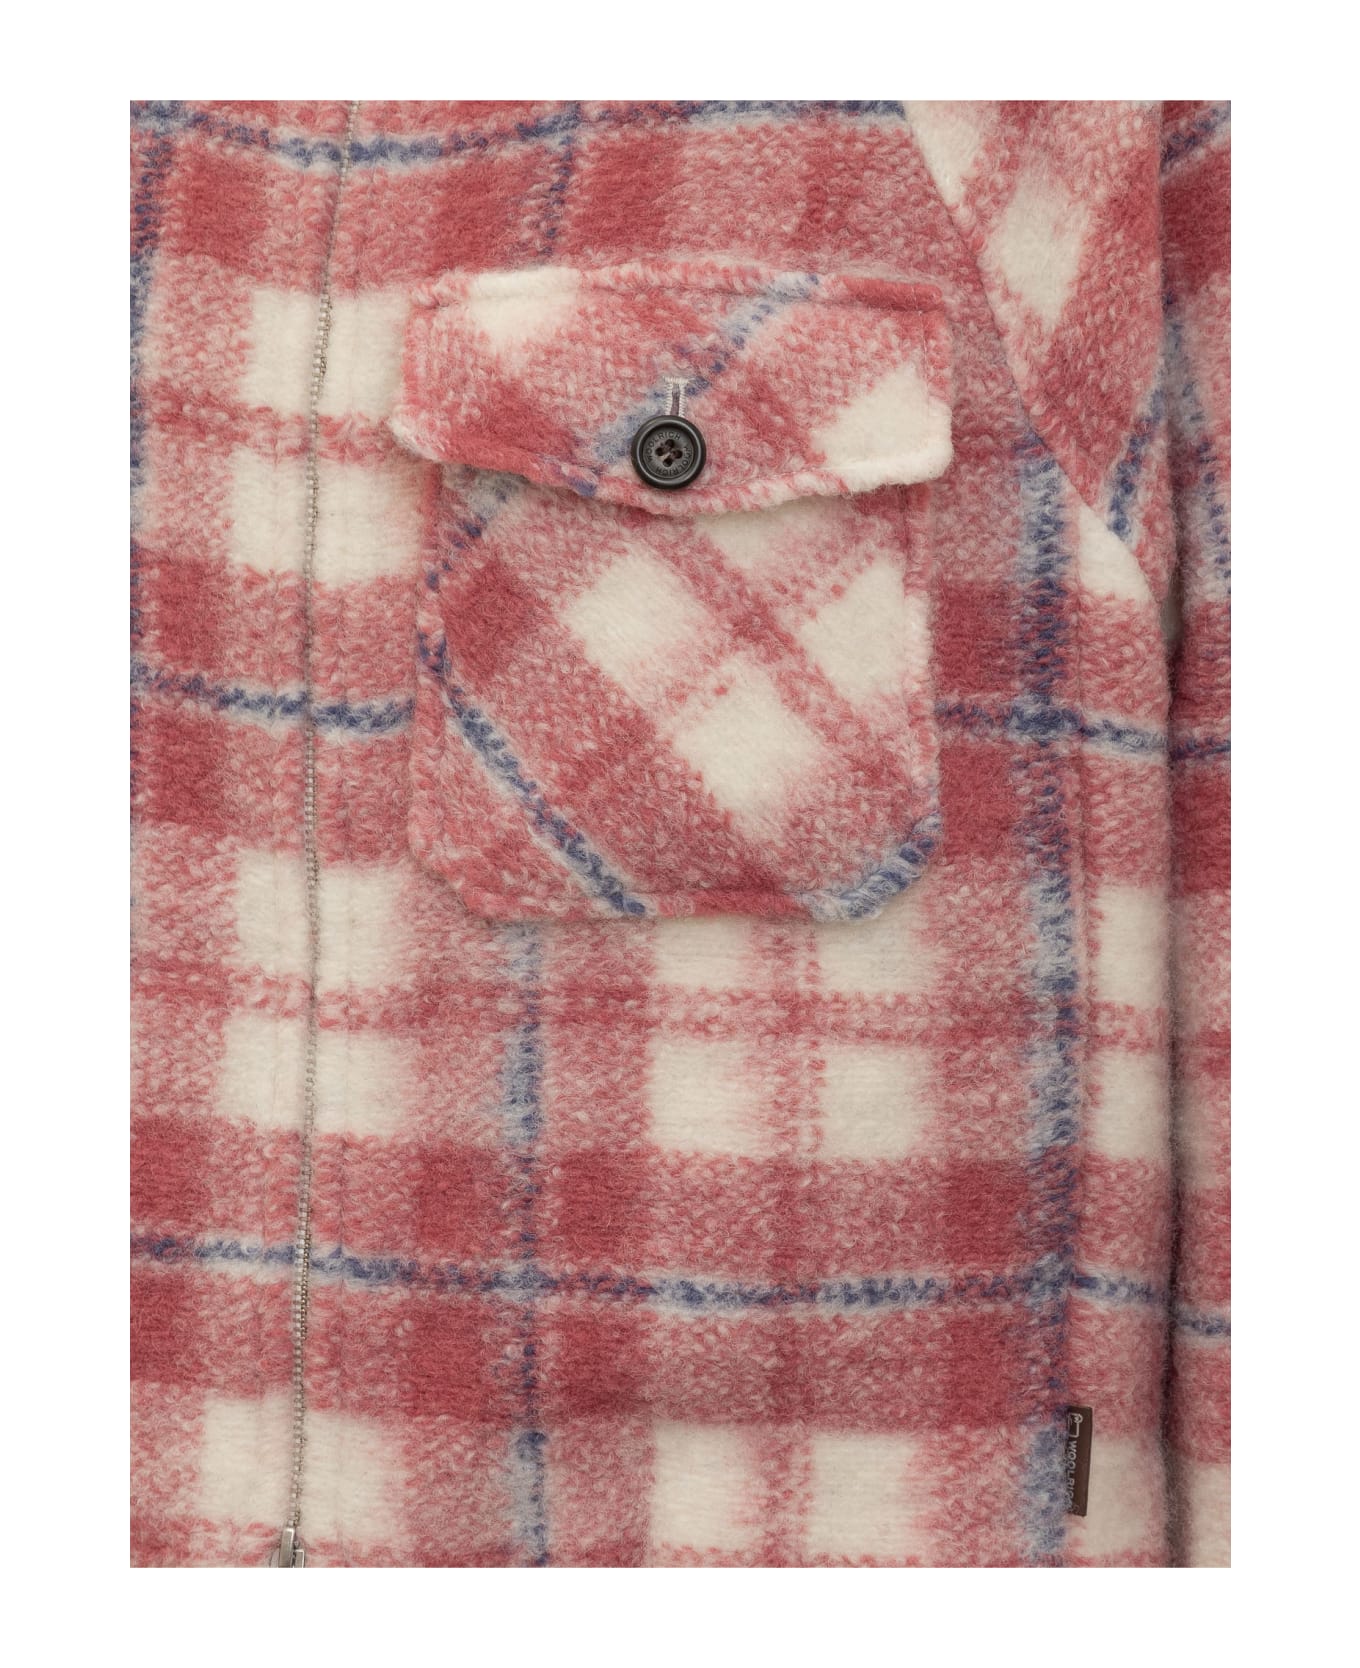 Woolrich Gentry Jacket - DRY ROSE CHECK シャツ